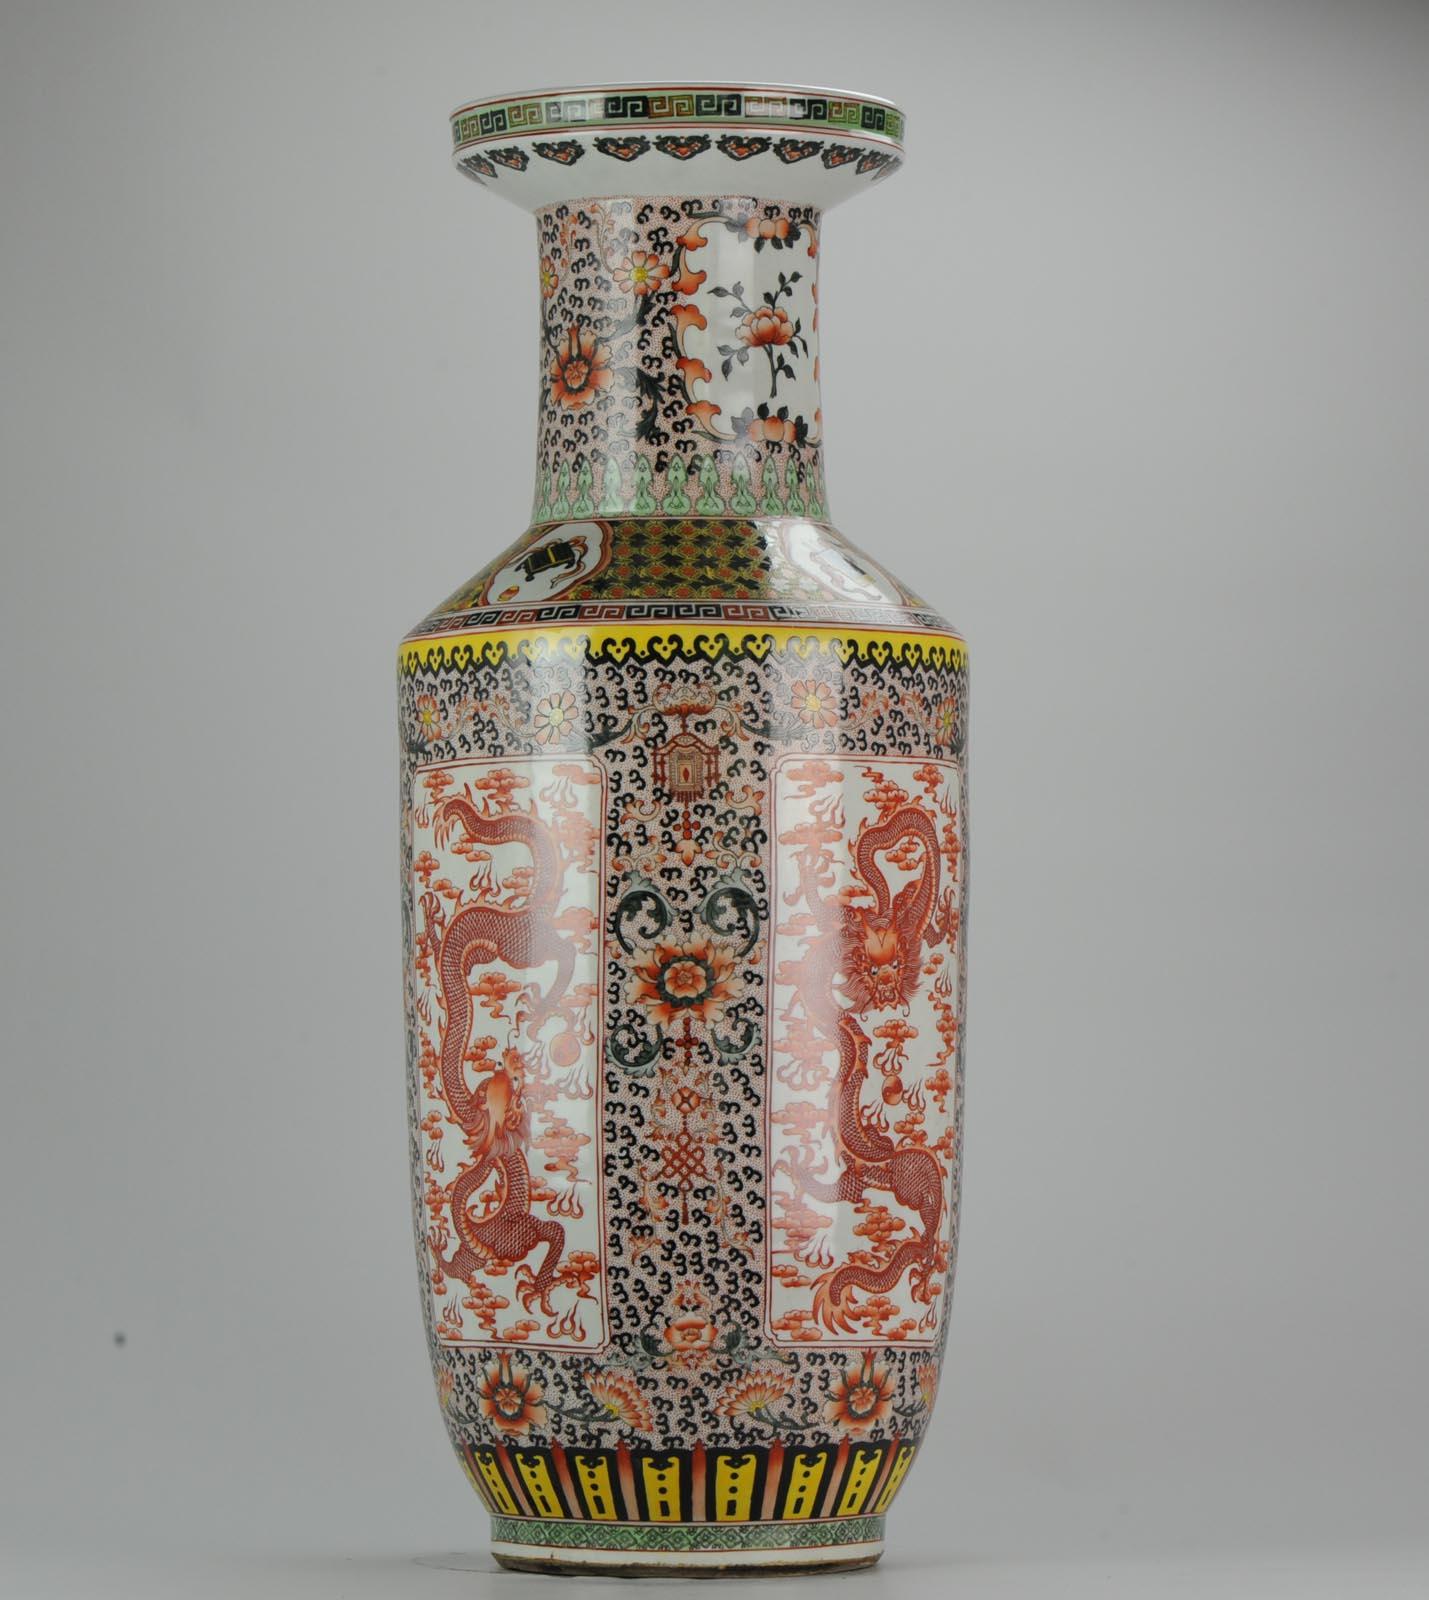 A very nicely decorated Vase with a scene of red dragons on a black and yellow ground.

Absolute top quality painting of the 20th century.

14-6-19-6-2
 
Overall condition; Very good. A chip to the baserim and small start hairline in base